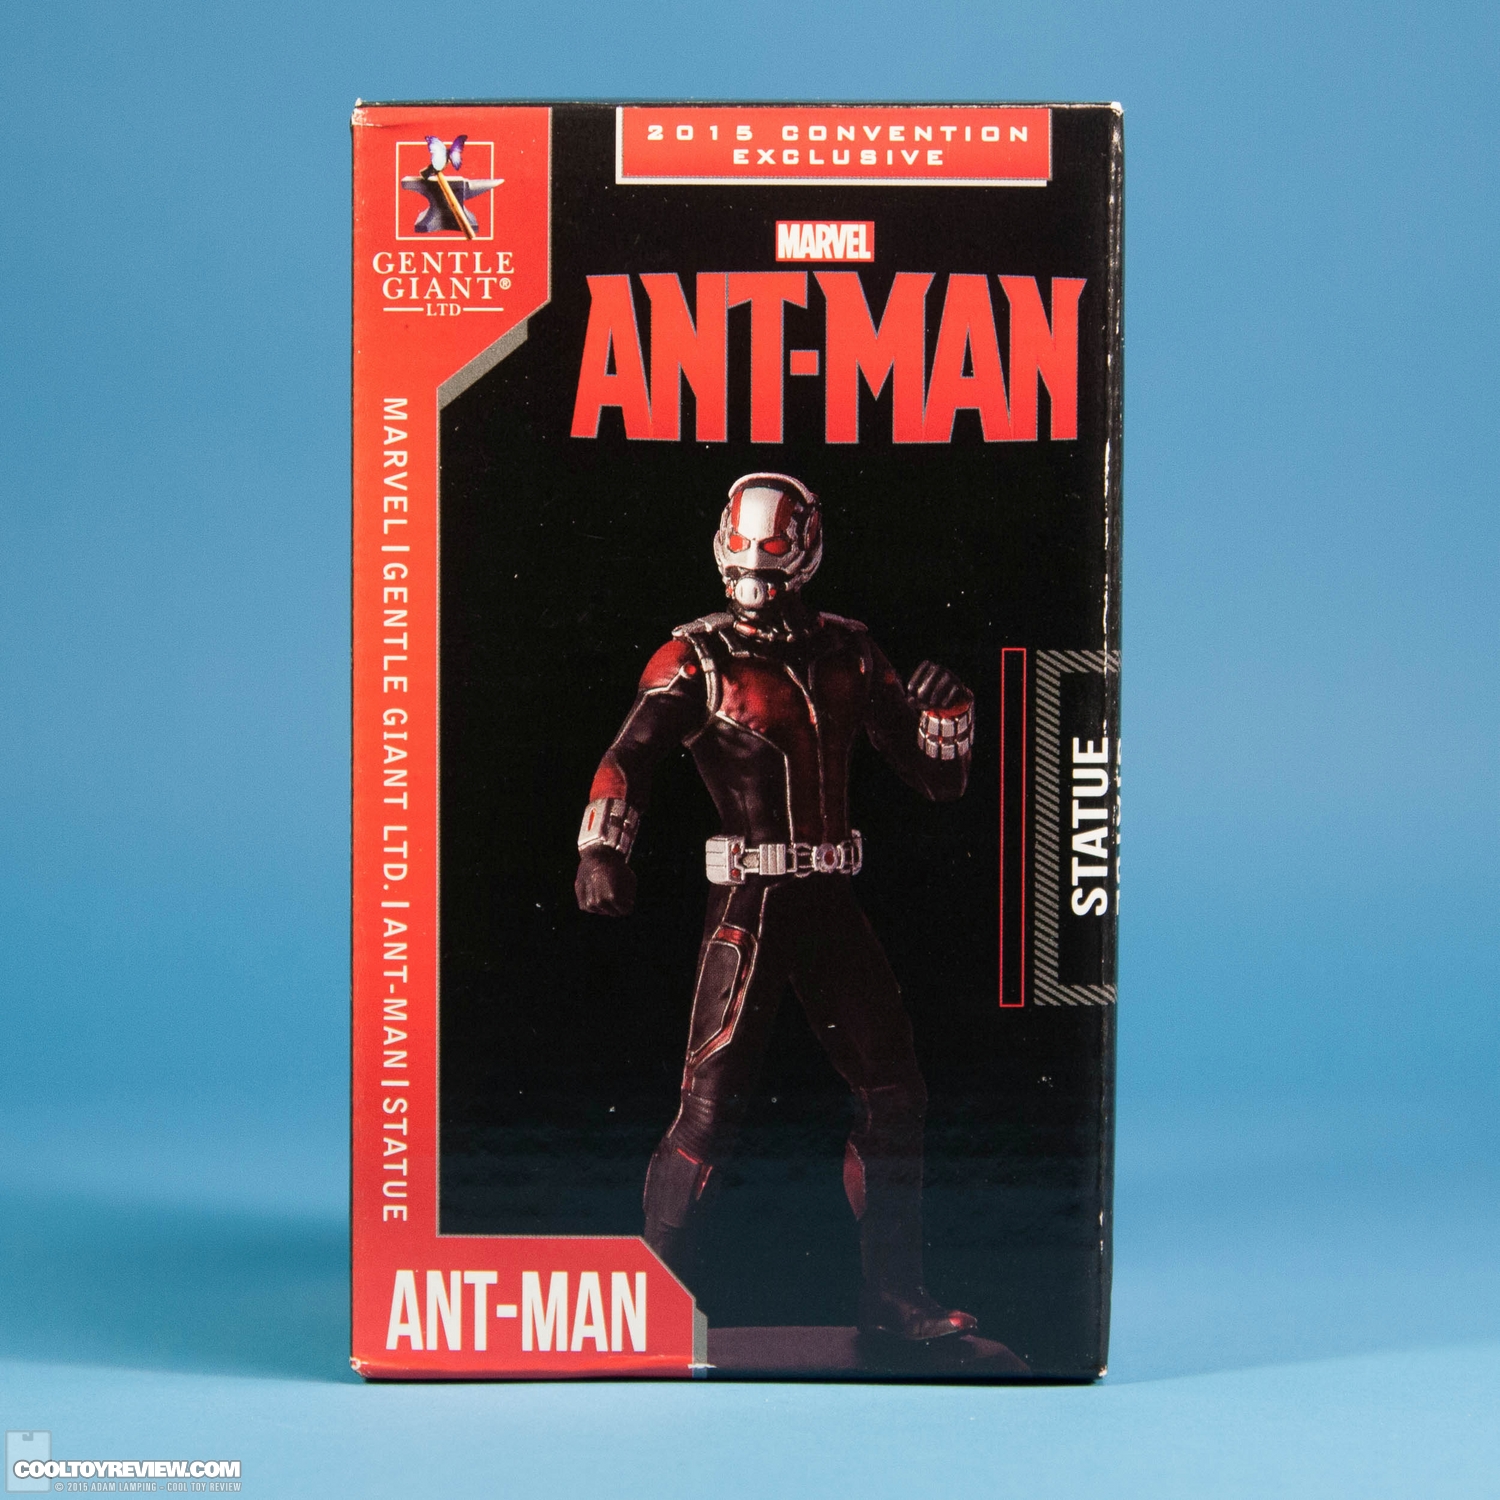 gentle-giant-ant-man-statue-2015-convention-exclusive-018.jpg